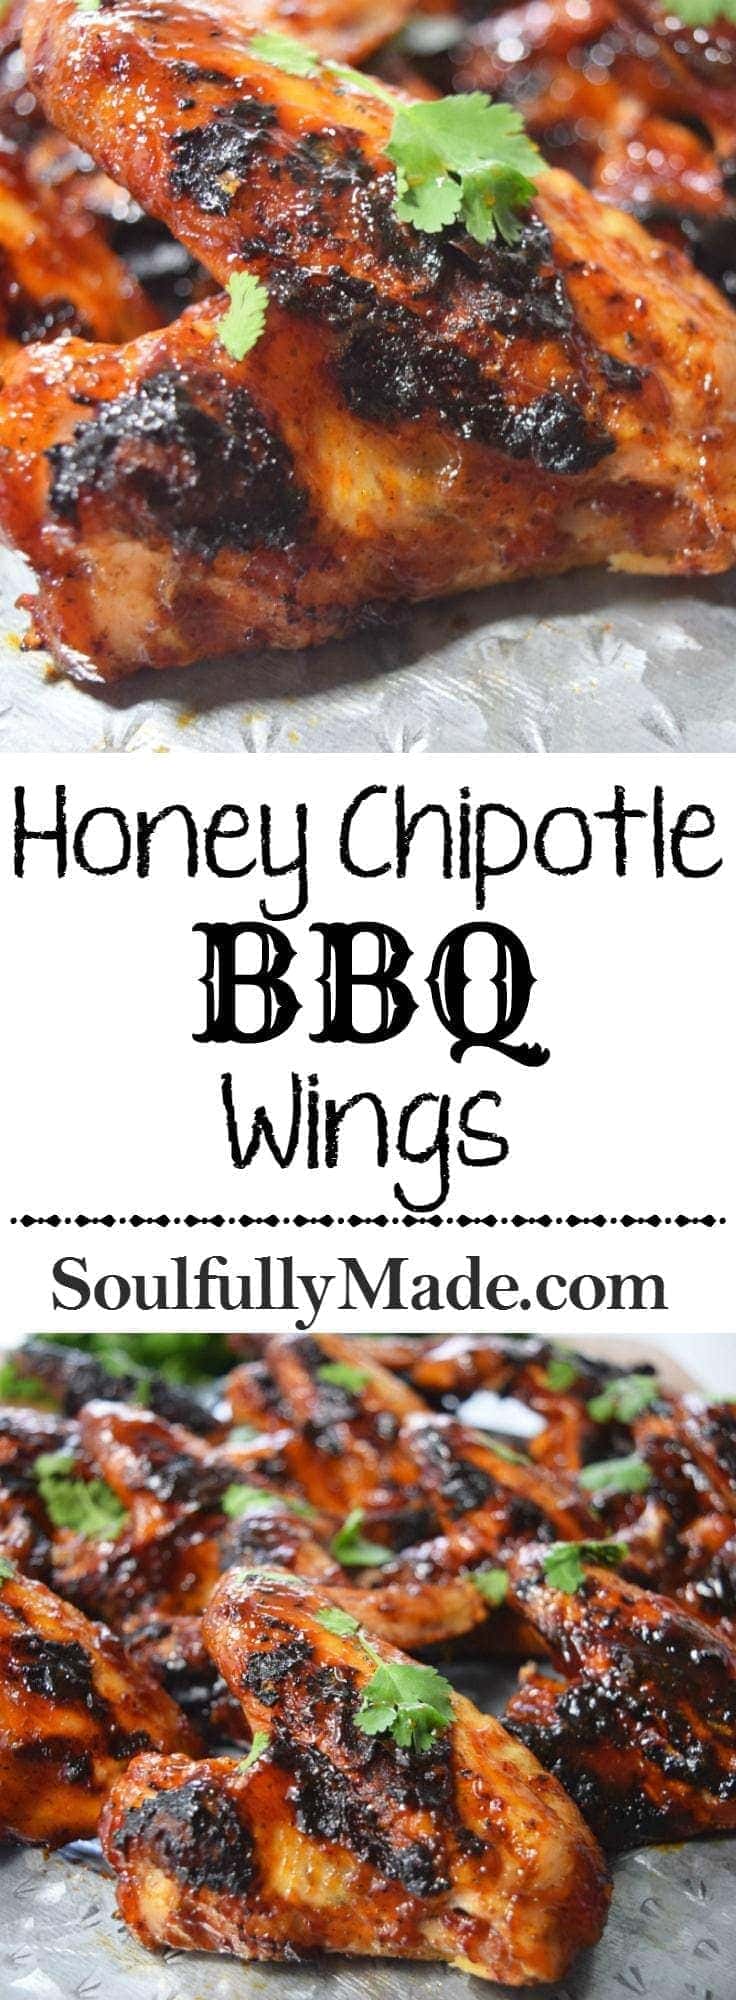 Honey Chipolte BBQ Wings